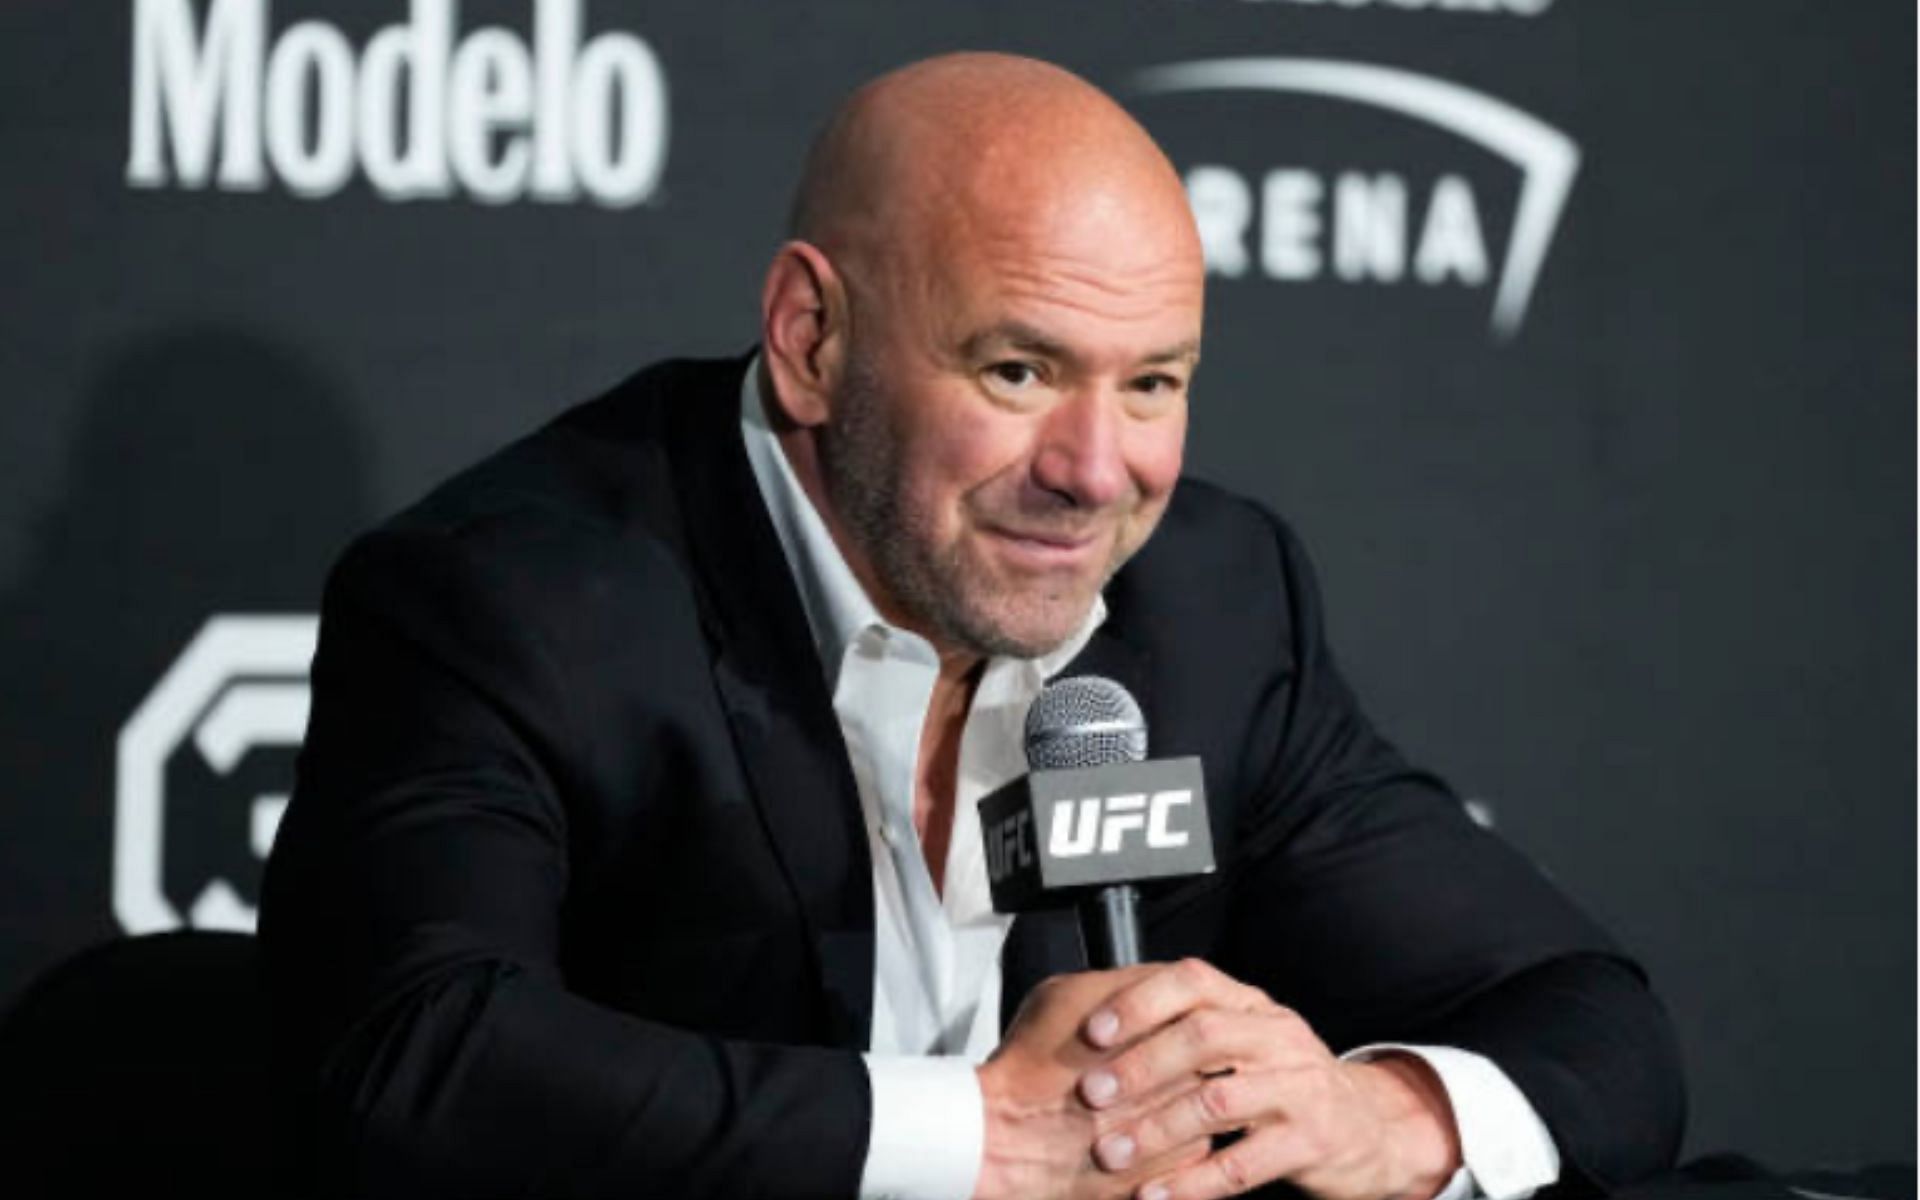 UFC CEO Dana White at UFC 290 in Las Vegas [Photo Courtesy of Getty Images]